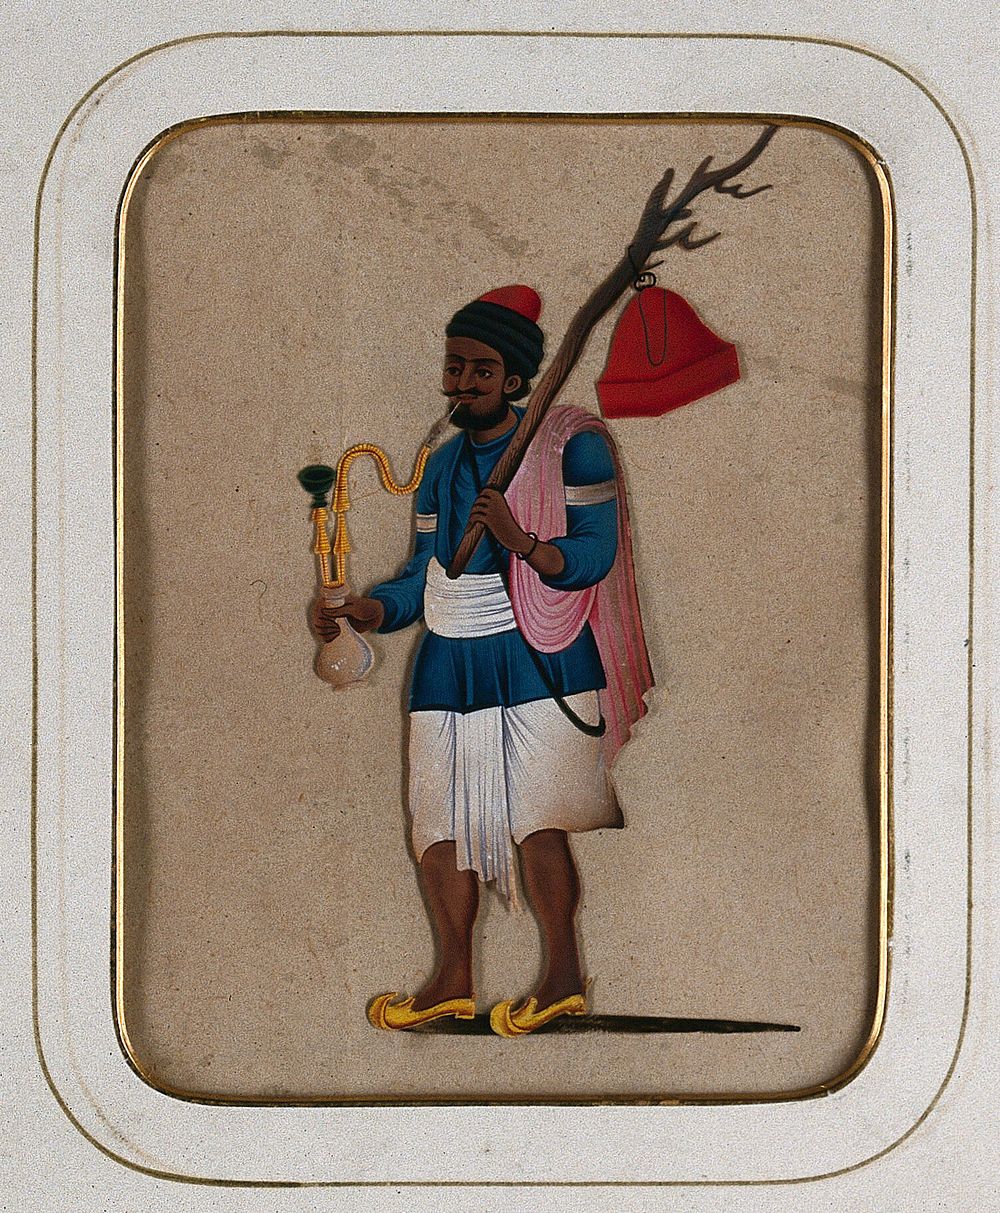 A man smoking a hookah pipe and holding a branch with a red object hanging from it. Gouache painting on mica by an Indian…